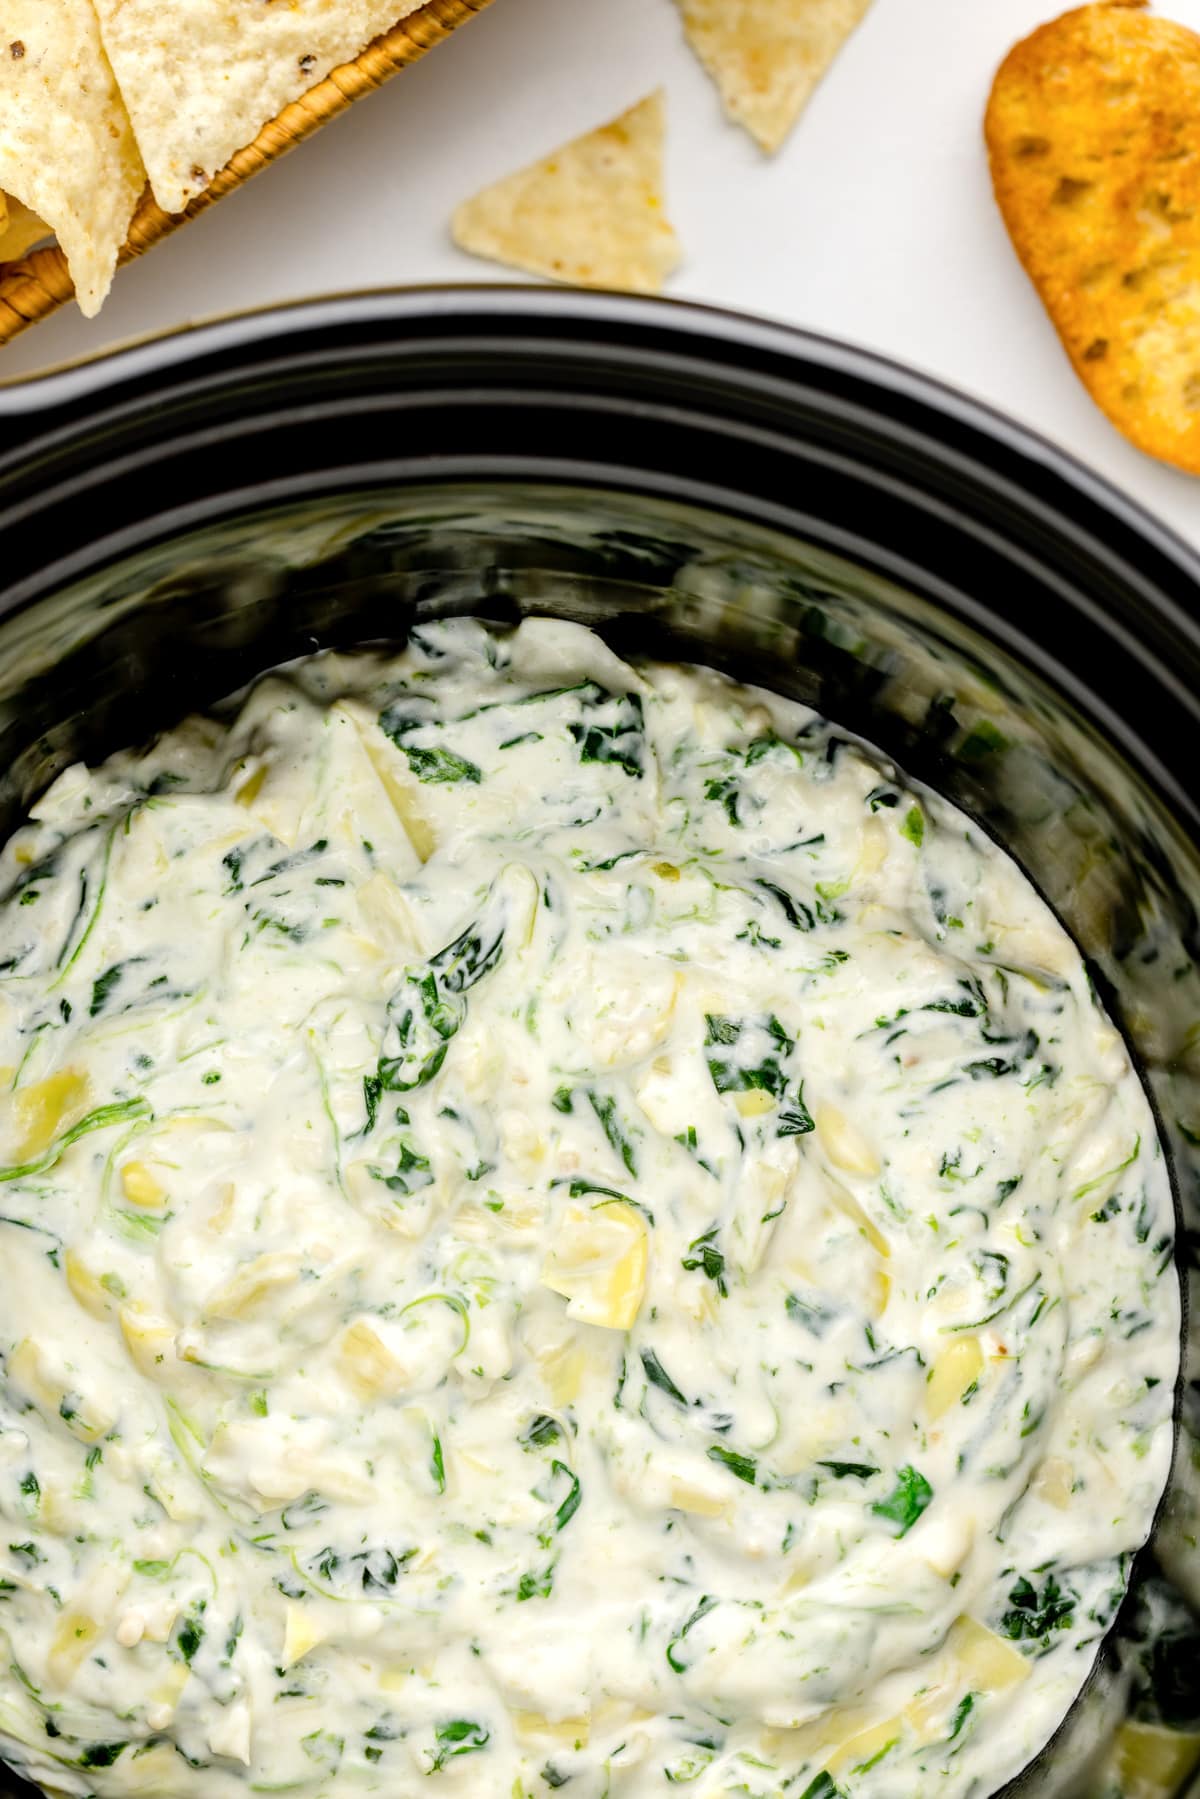 Spinach Artichoke Dip - Crockpot or Oven Baked